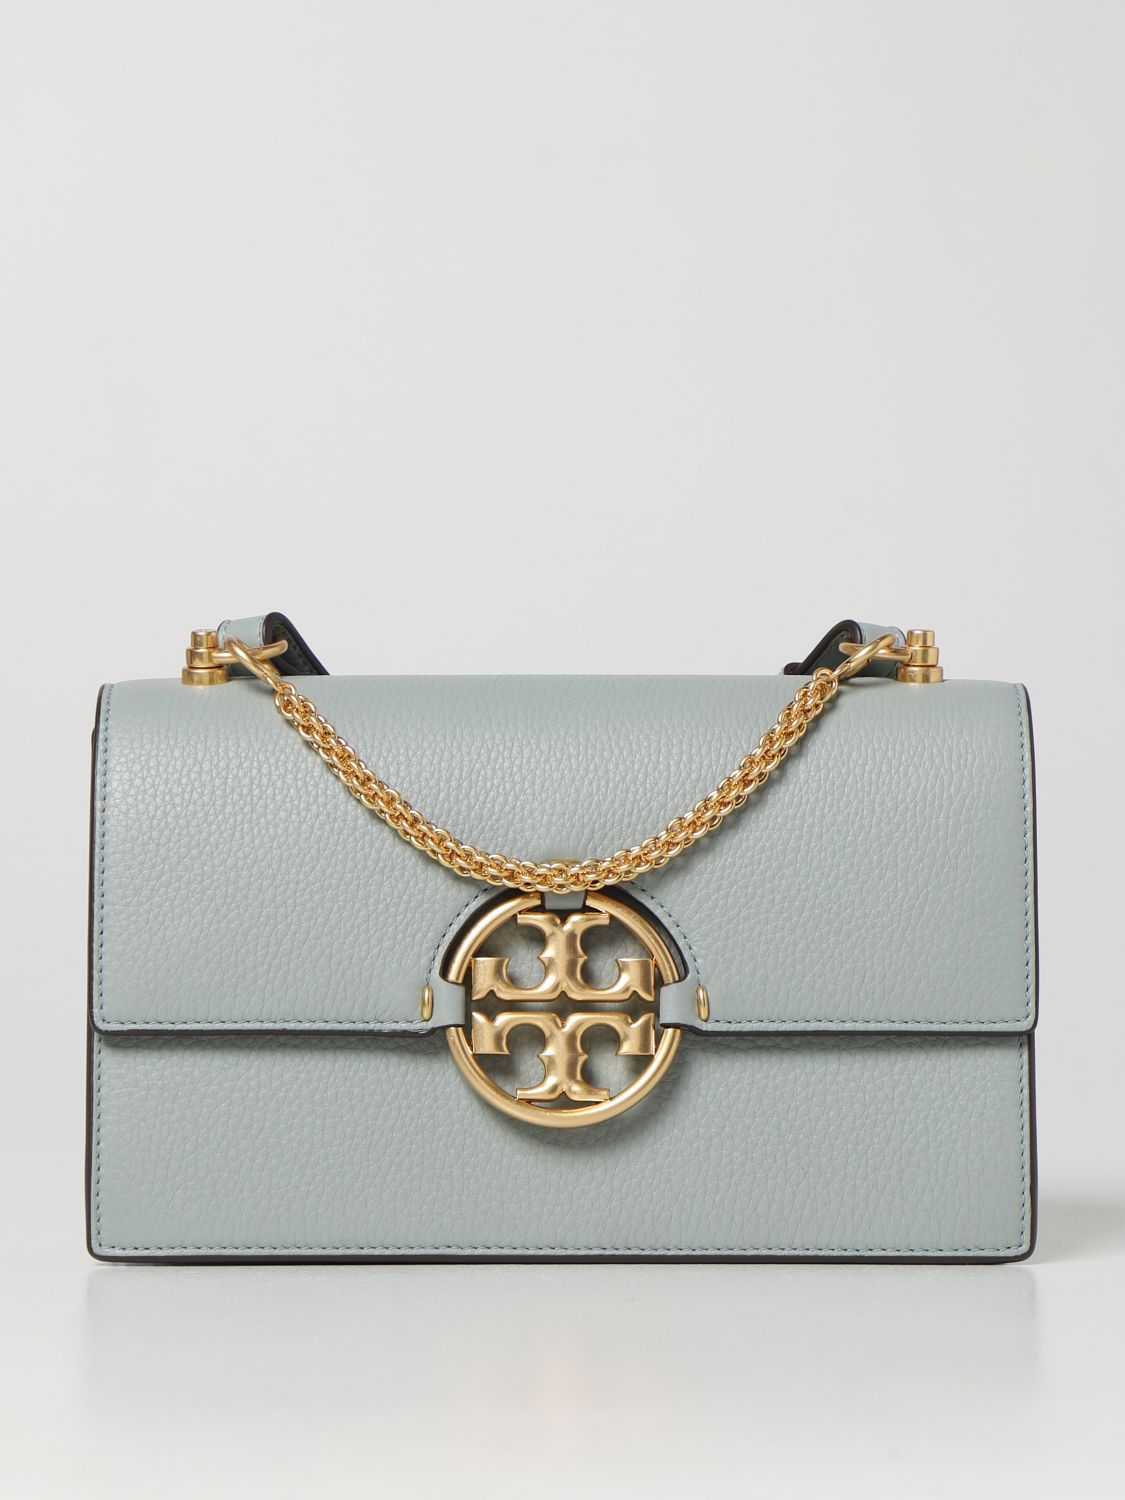 Tory Burch Miller Bag In Grained Leather In Sky Blue | ModeSens